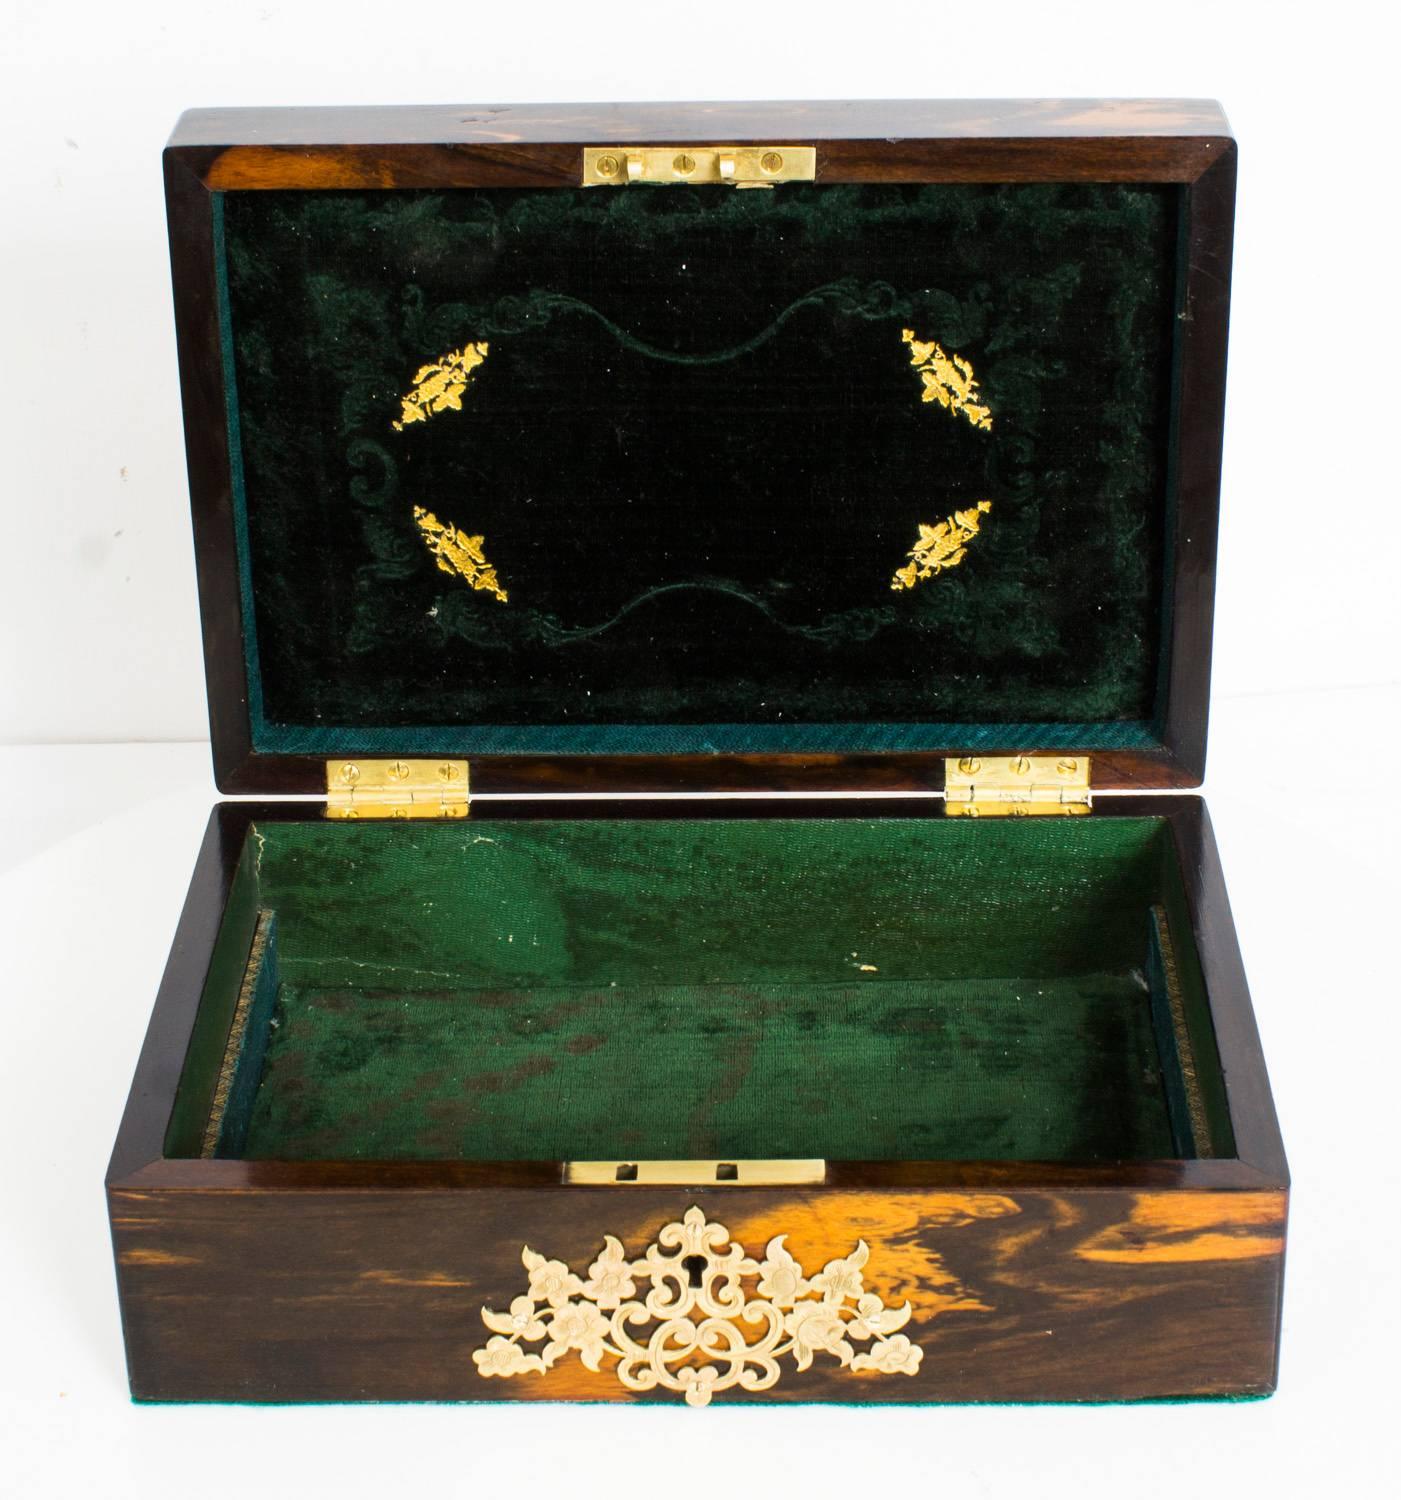 This is an absolutely fabulous antique English Victorian jewelry casket, circa 1860 in date.

The casket is made from coromandel with beautiful ormolu mounts and escutcheon. The lid bears five decorative Sèvres porcelain plaques depicting